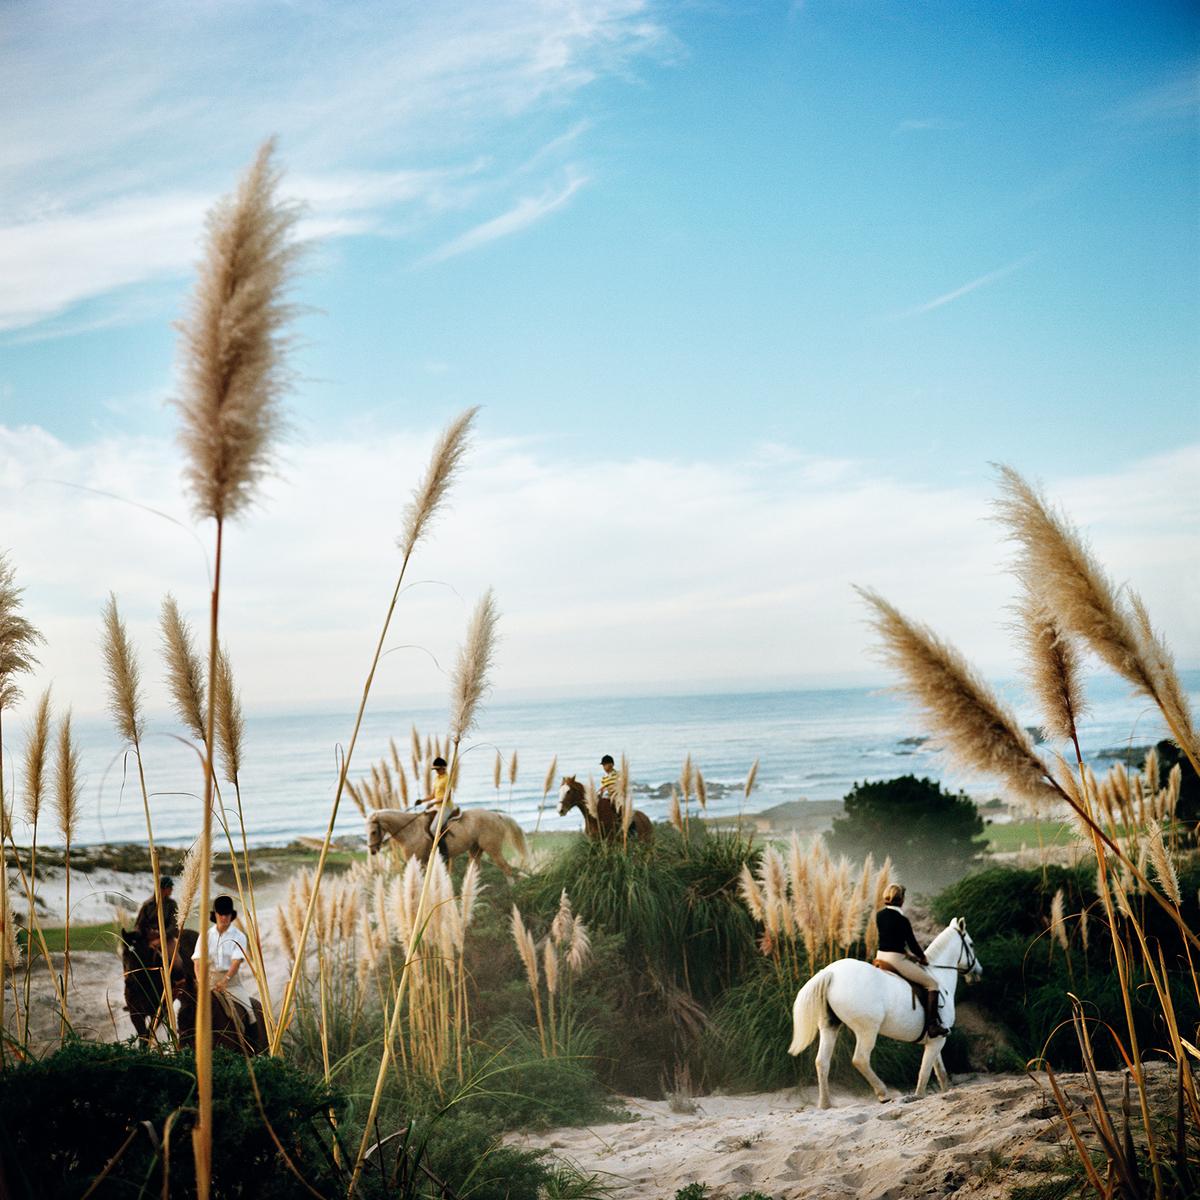 Pebble Beach

Riders from the Pebble Beach Equestrian Centre wind their way through the Californian sand dunes and pampas grass, November 1976.

Chromogenic C print 
Printed this year 
Slim Aarons Estate Edition 

Produced utilising the only